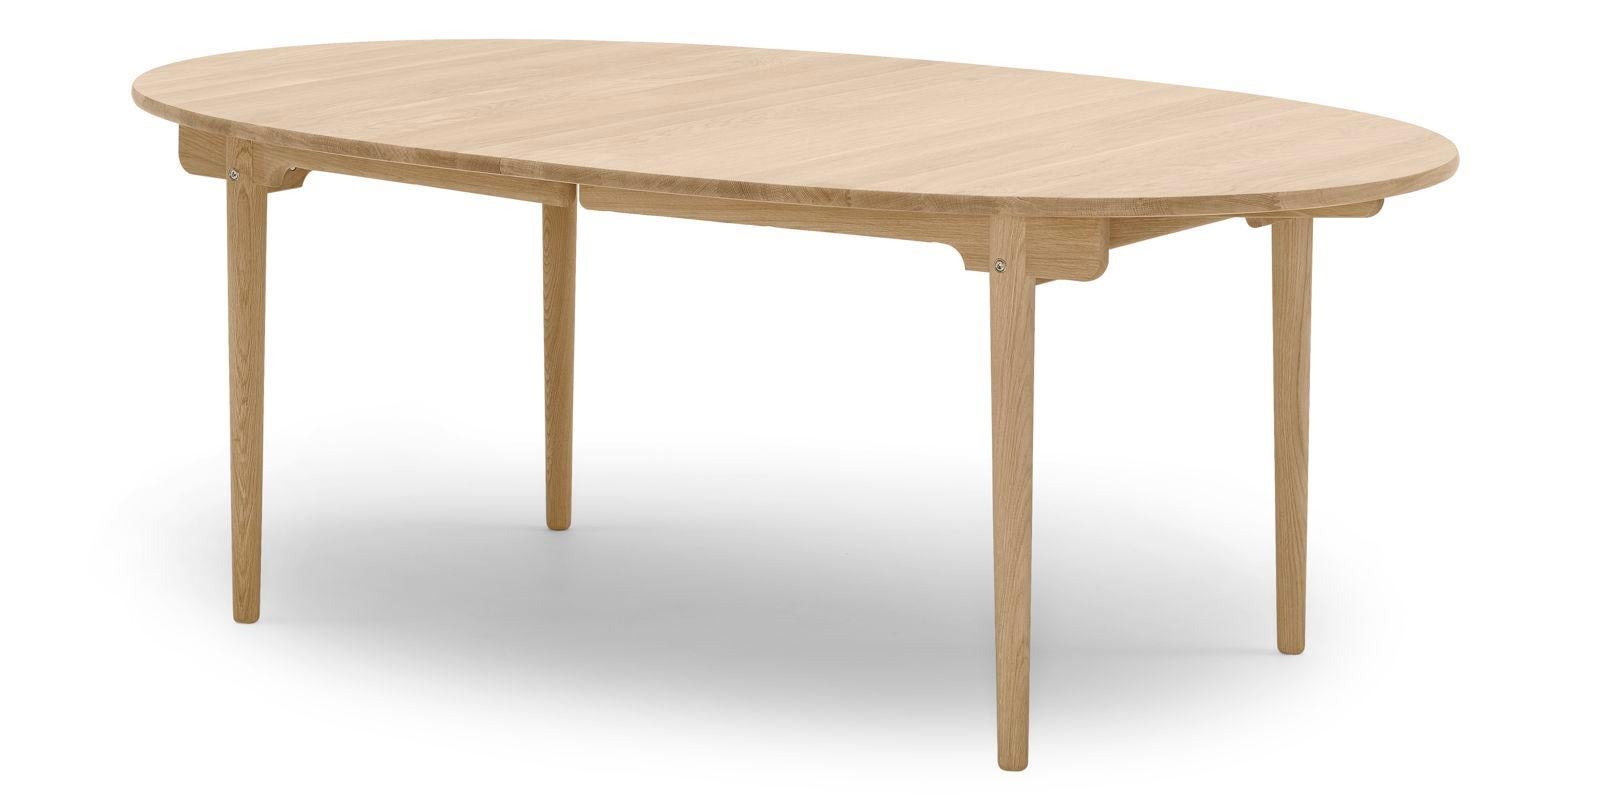 The CH338 Dining Table, designed for 6 people, is a longer version of Hans J. Wegner’s CH337 4-person dining table from 1962. Like the CH337, the CH338 has an elliptical-shaped tabletop that can be extended with leaves when more seats are needed.